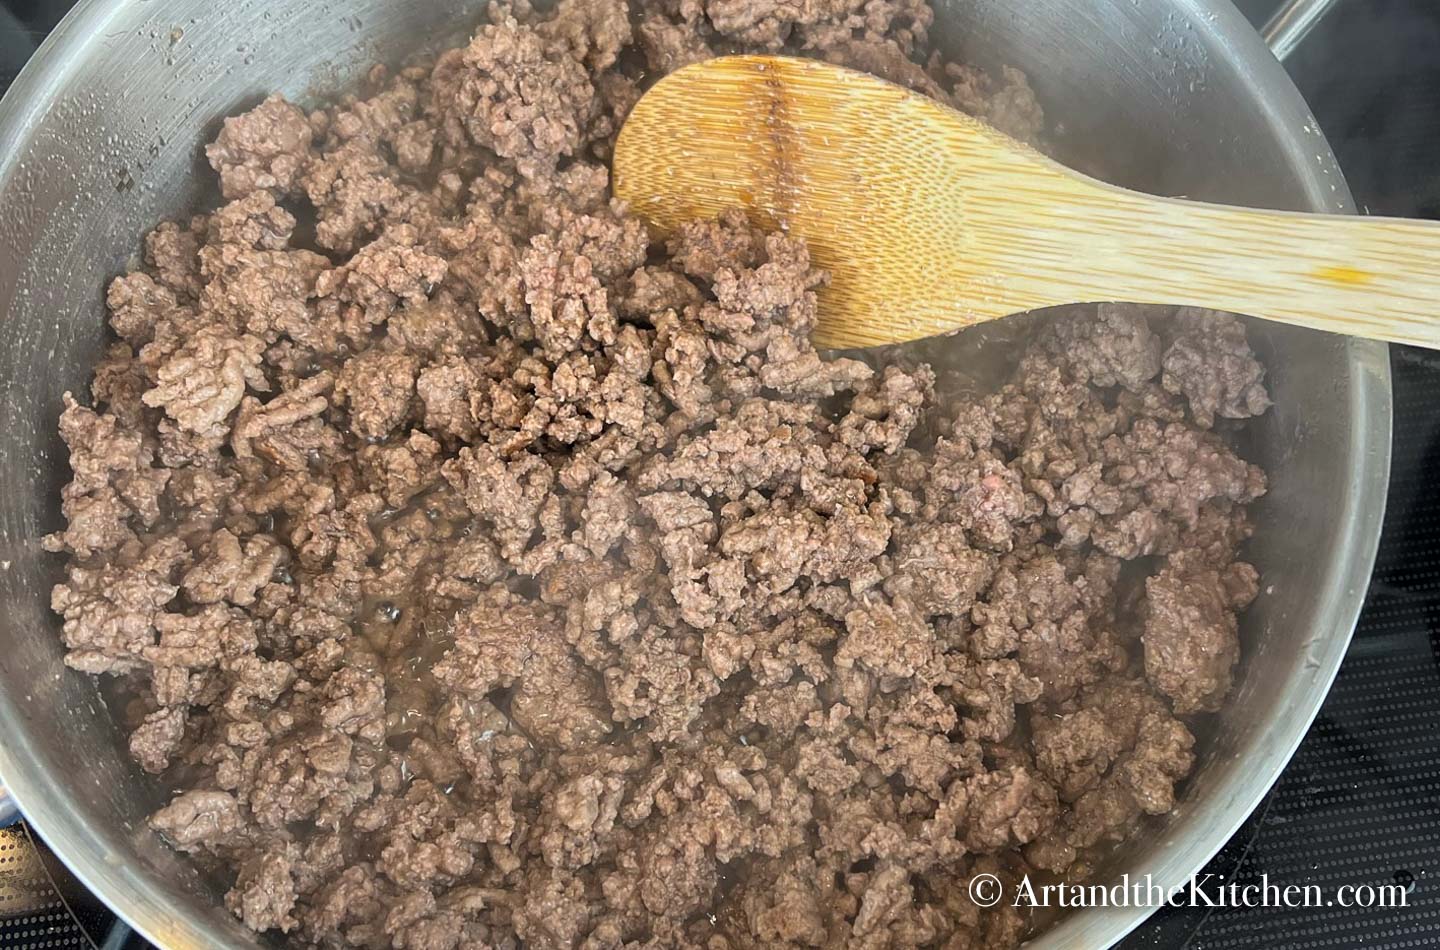 Stainless steel skillet filled with cooked ground beef. Wooden spoon stirring.